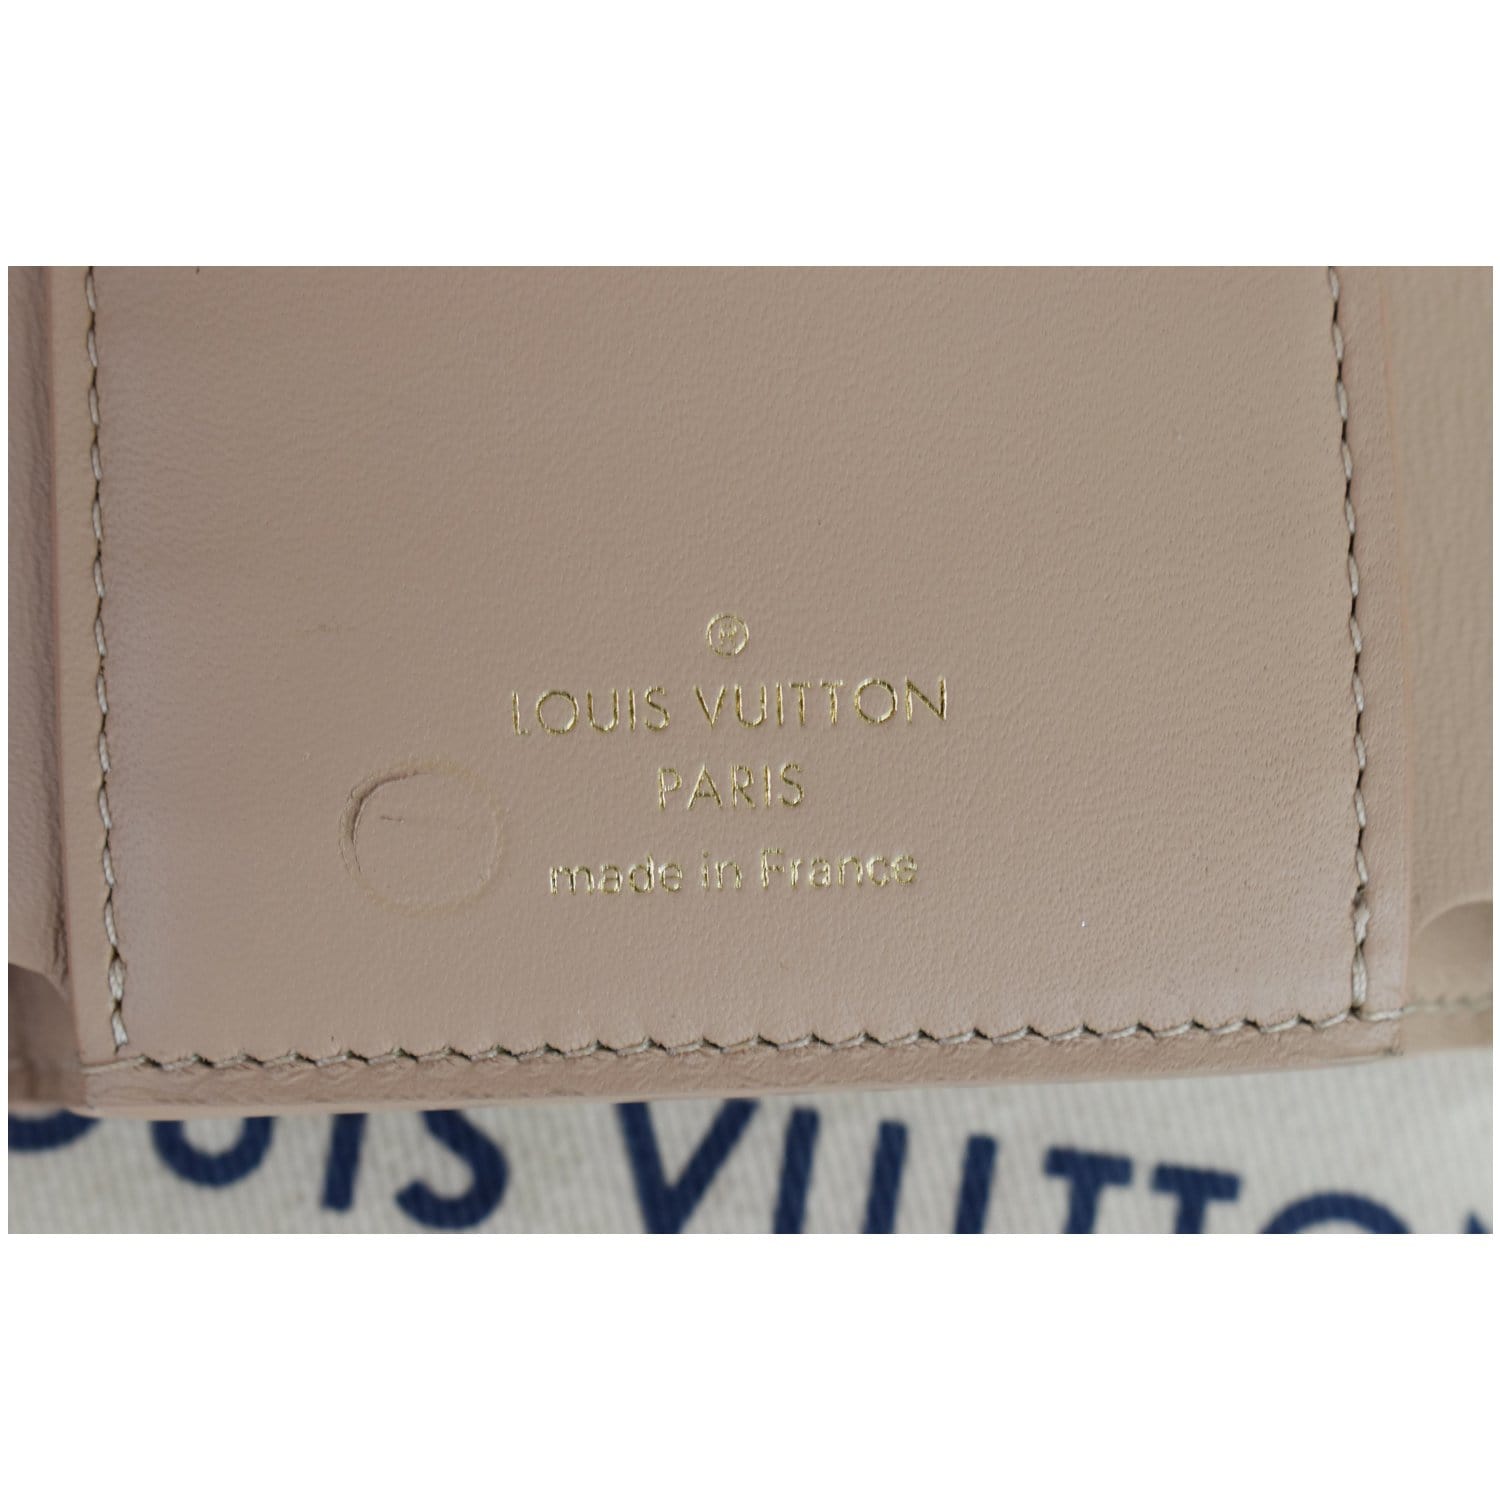 Preloved Louis Vuitton Beige Leather Studded Capucines Compact Wallet MI0169 092823